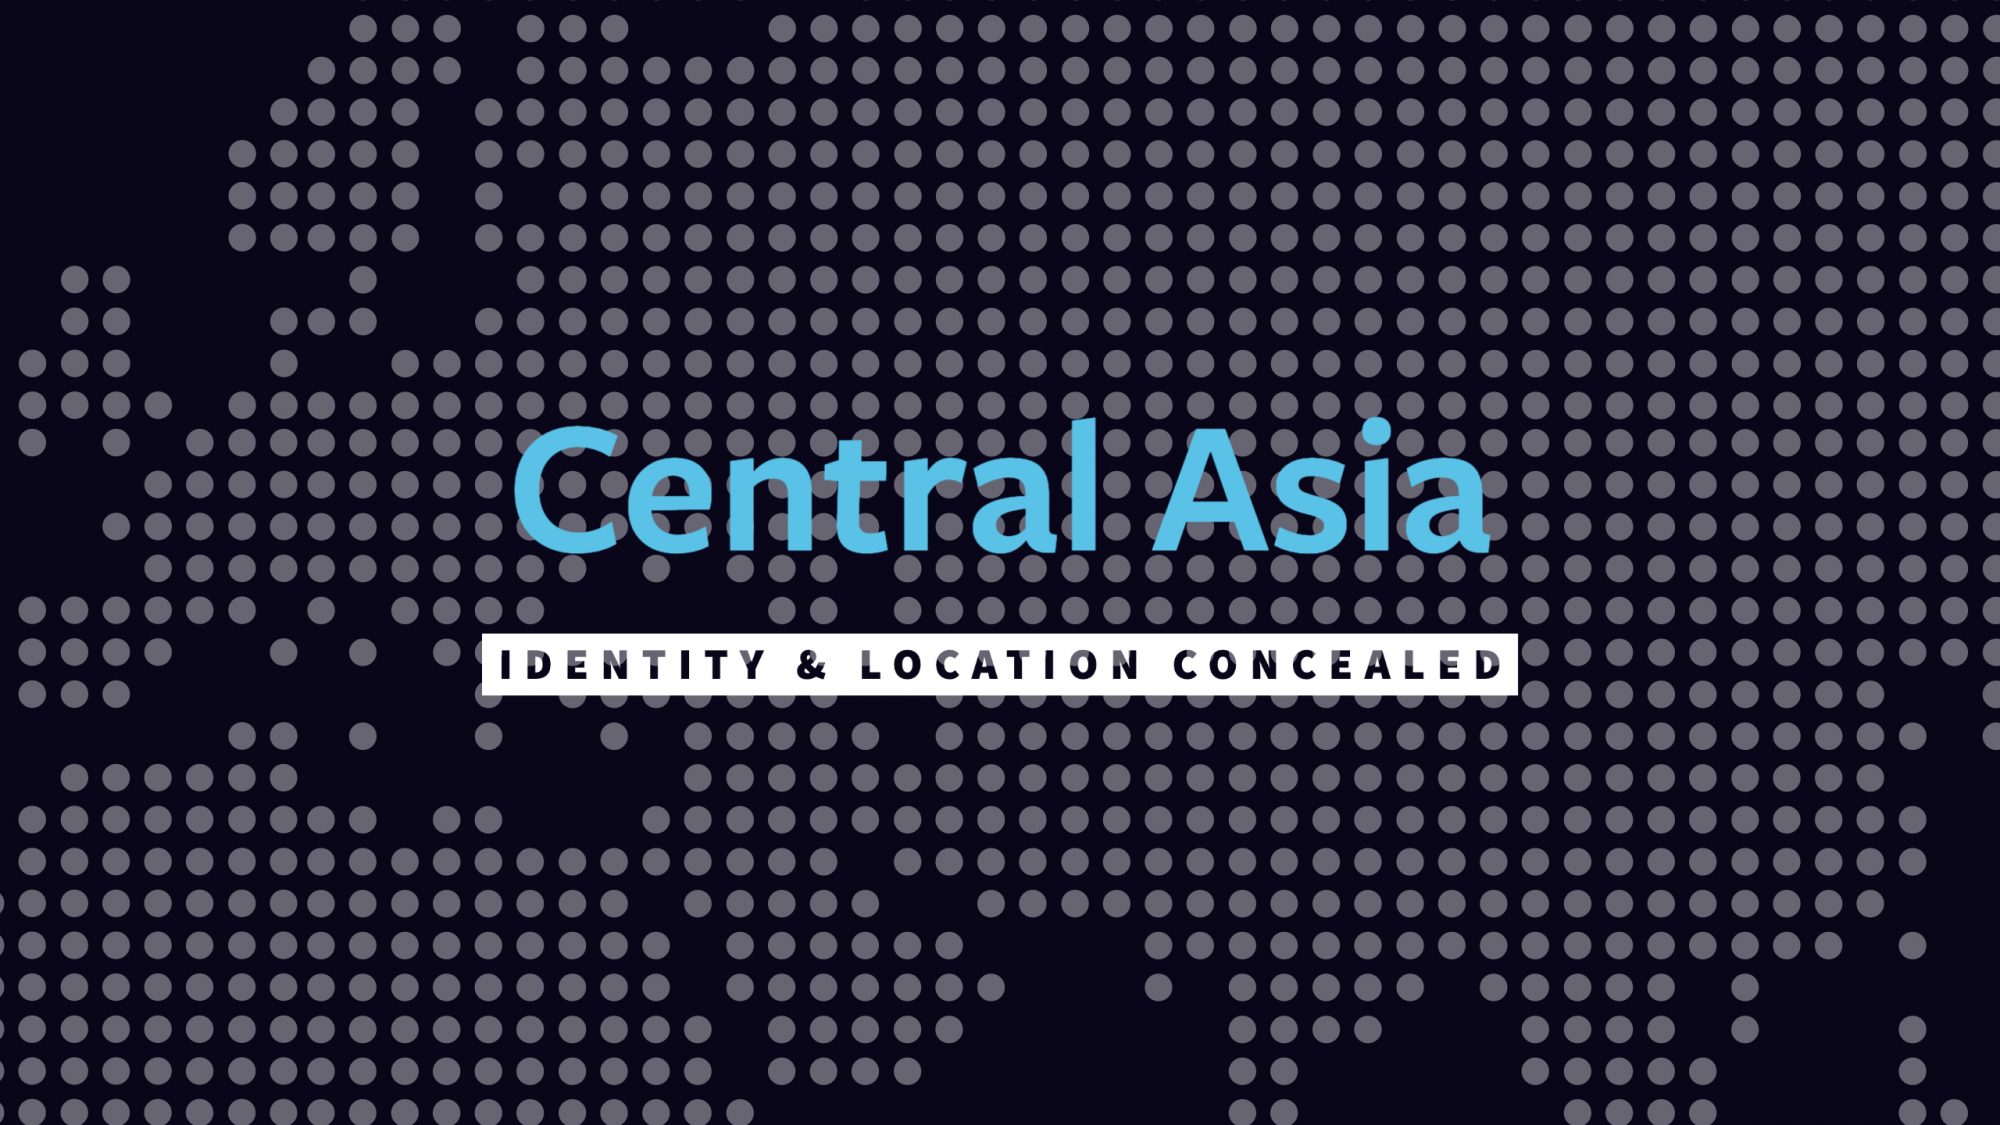 central-asia-iden-local-concealed